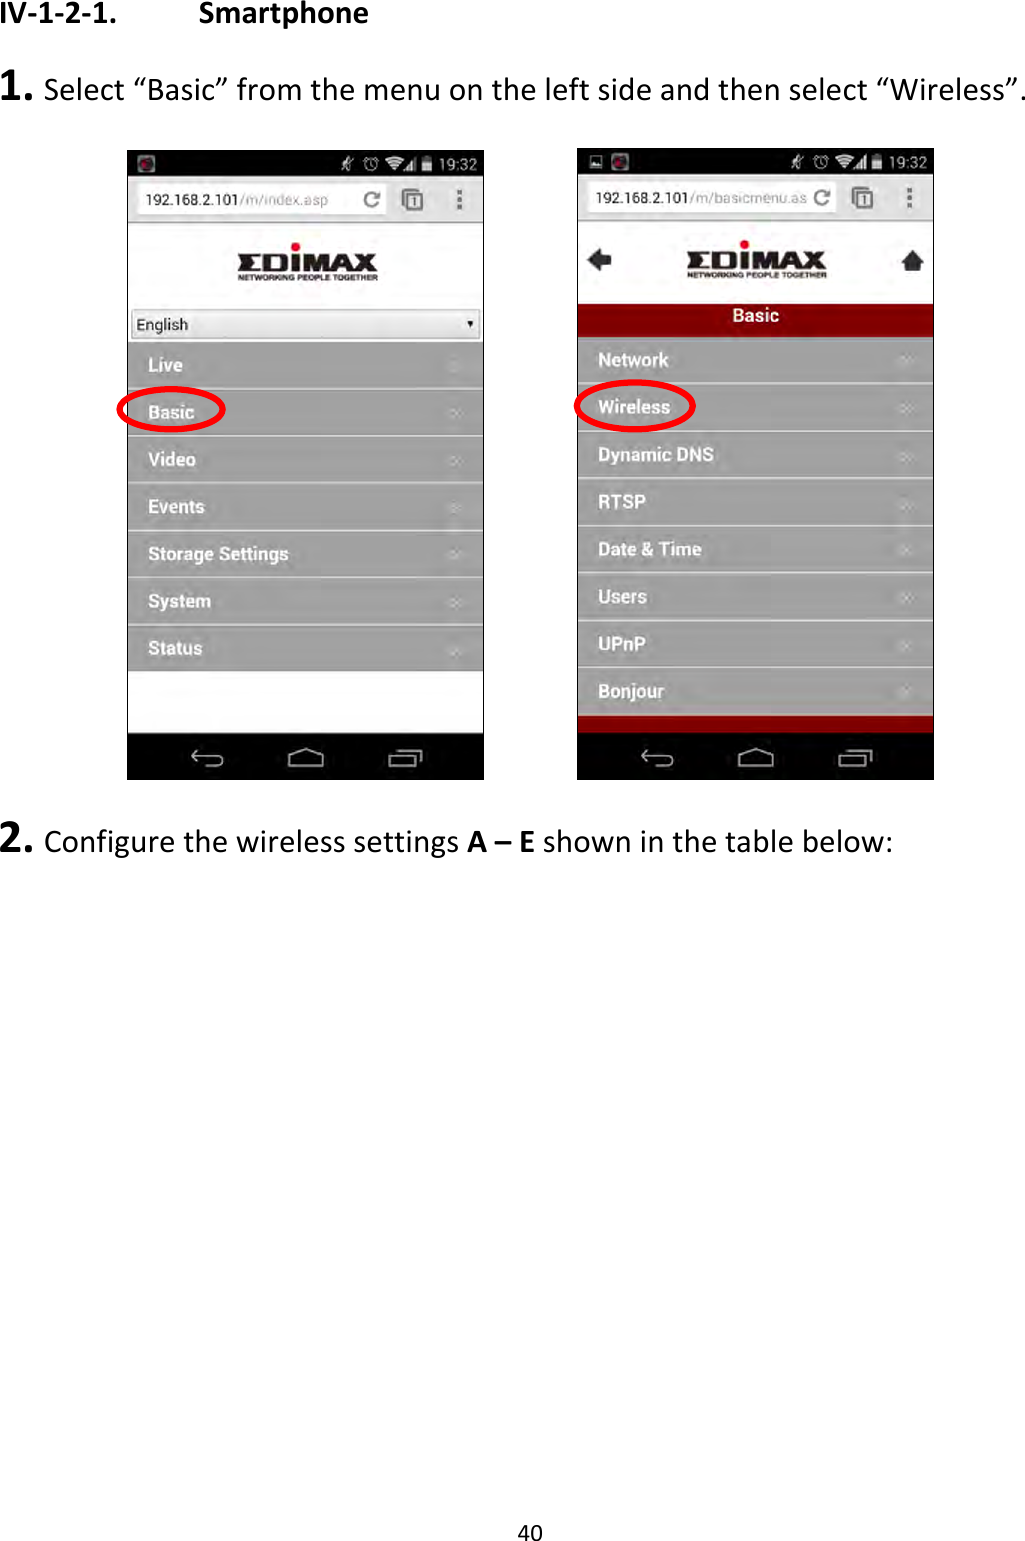 40  IV-1-2-1.    Smartphone  1.  Select “Basic” from the menu on the left side and then select “Wireless”.         2.  Configure the wireless settings A – E shown in the table below:  